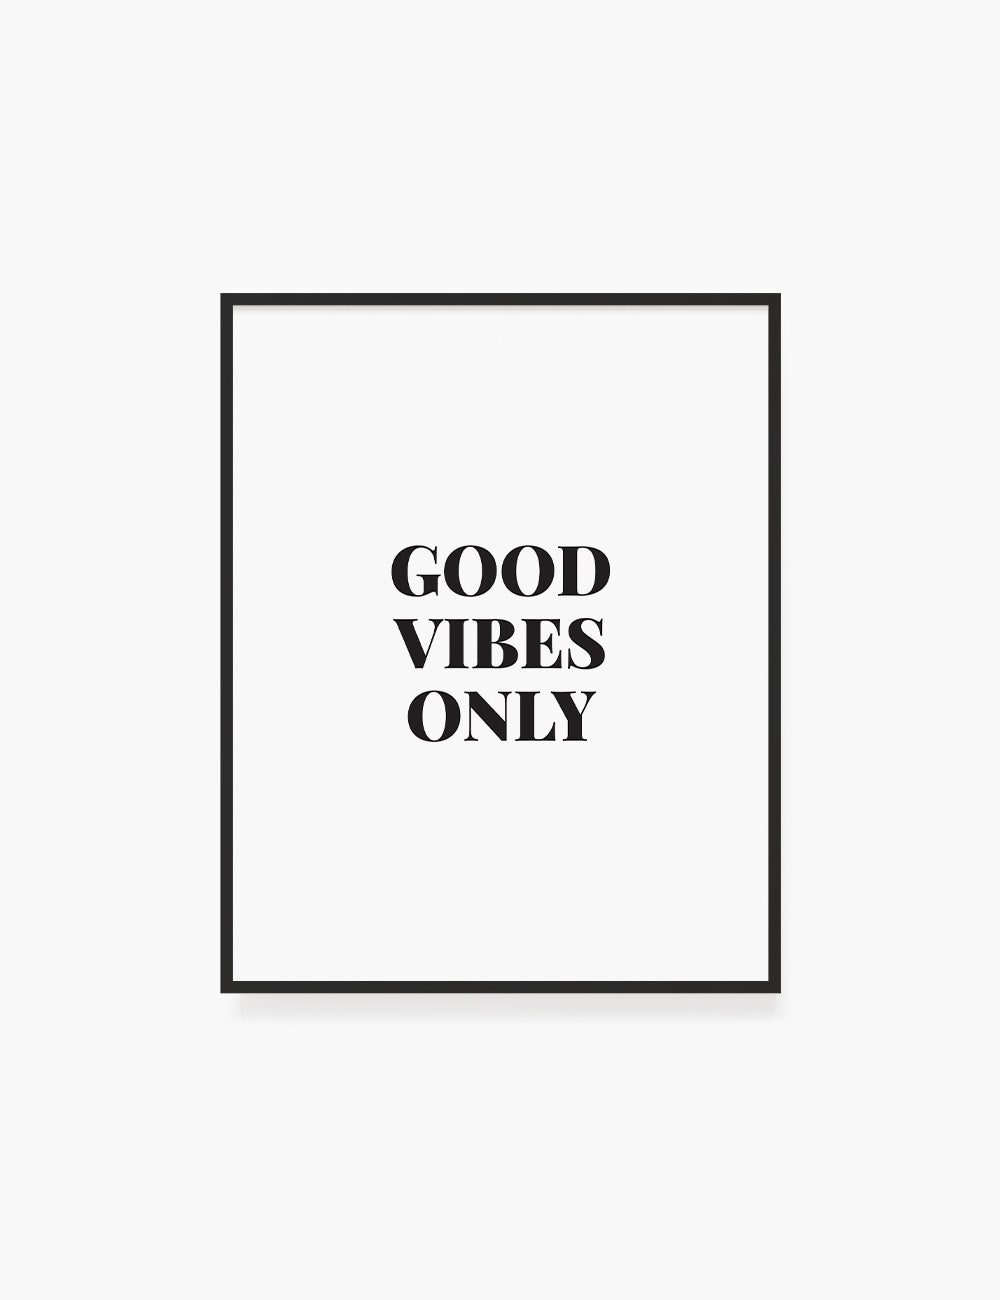 Printable Wall Art Quote: GOOD VIBES ONLY Printable Poster. Inspirational Quote. Motivational Quote. WA021 - Paper Moon Art & Design